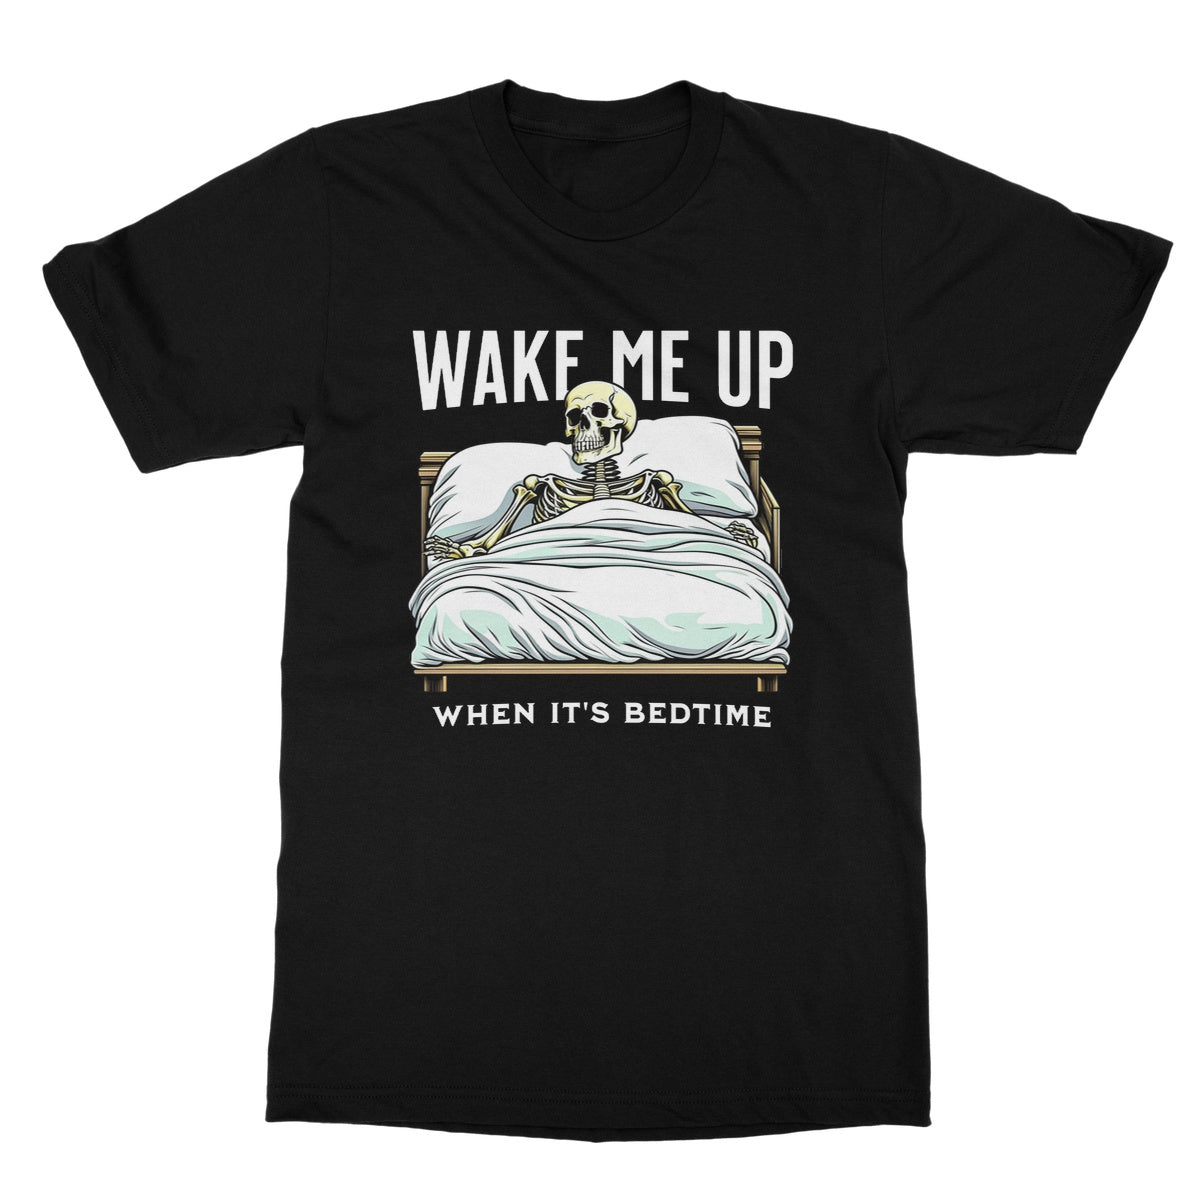 wake me up when it is bedtime t shirt black